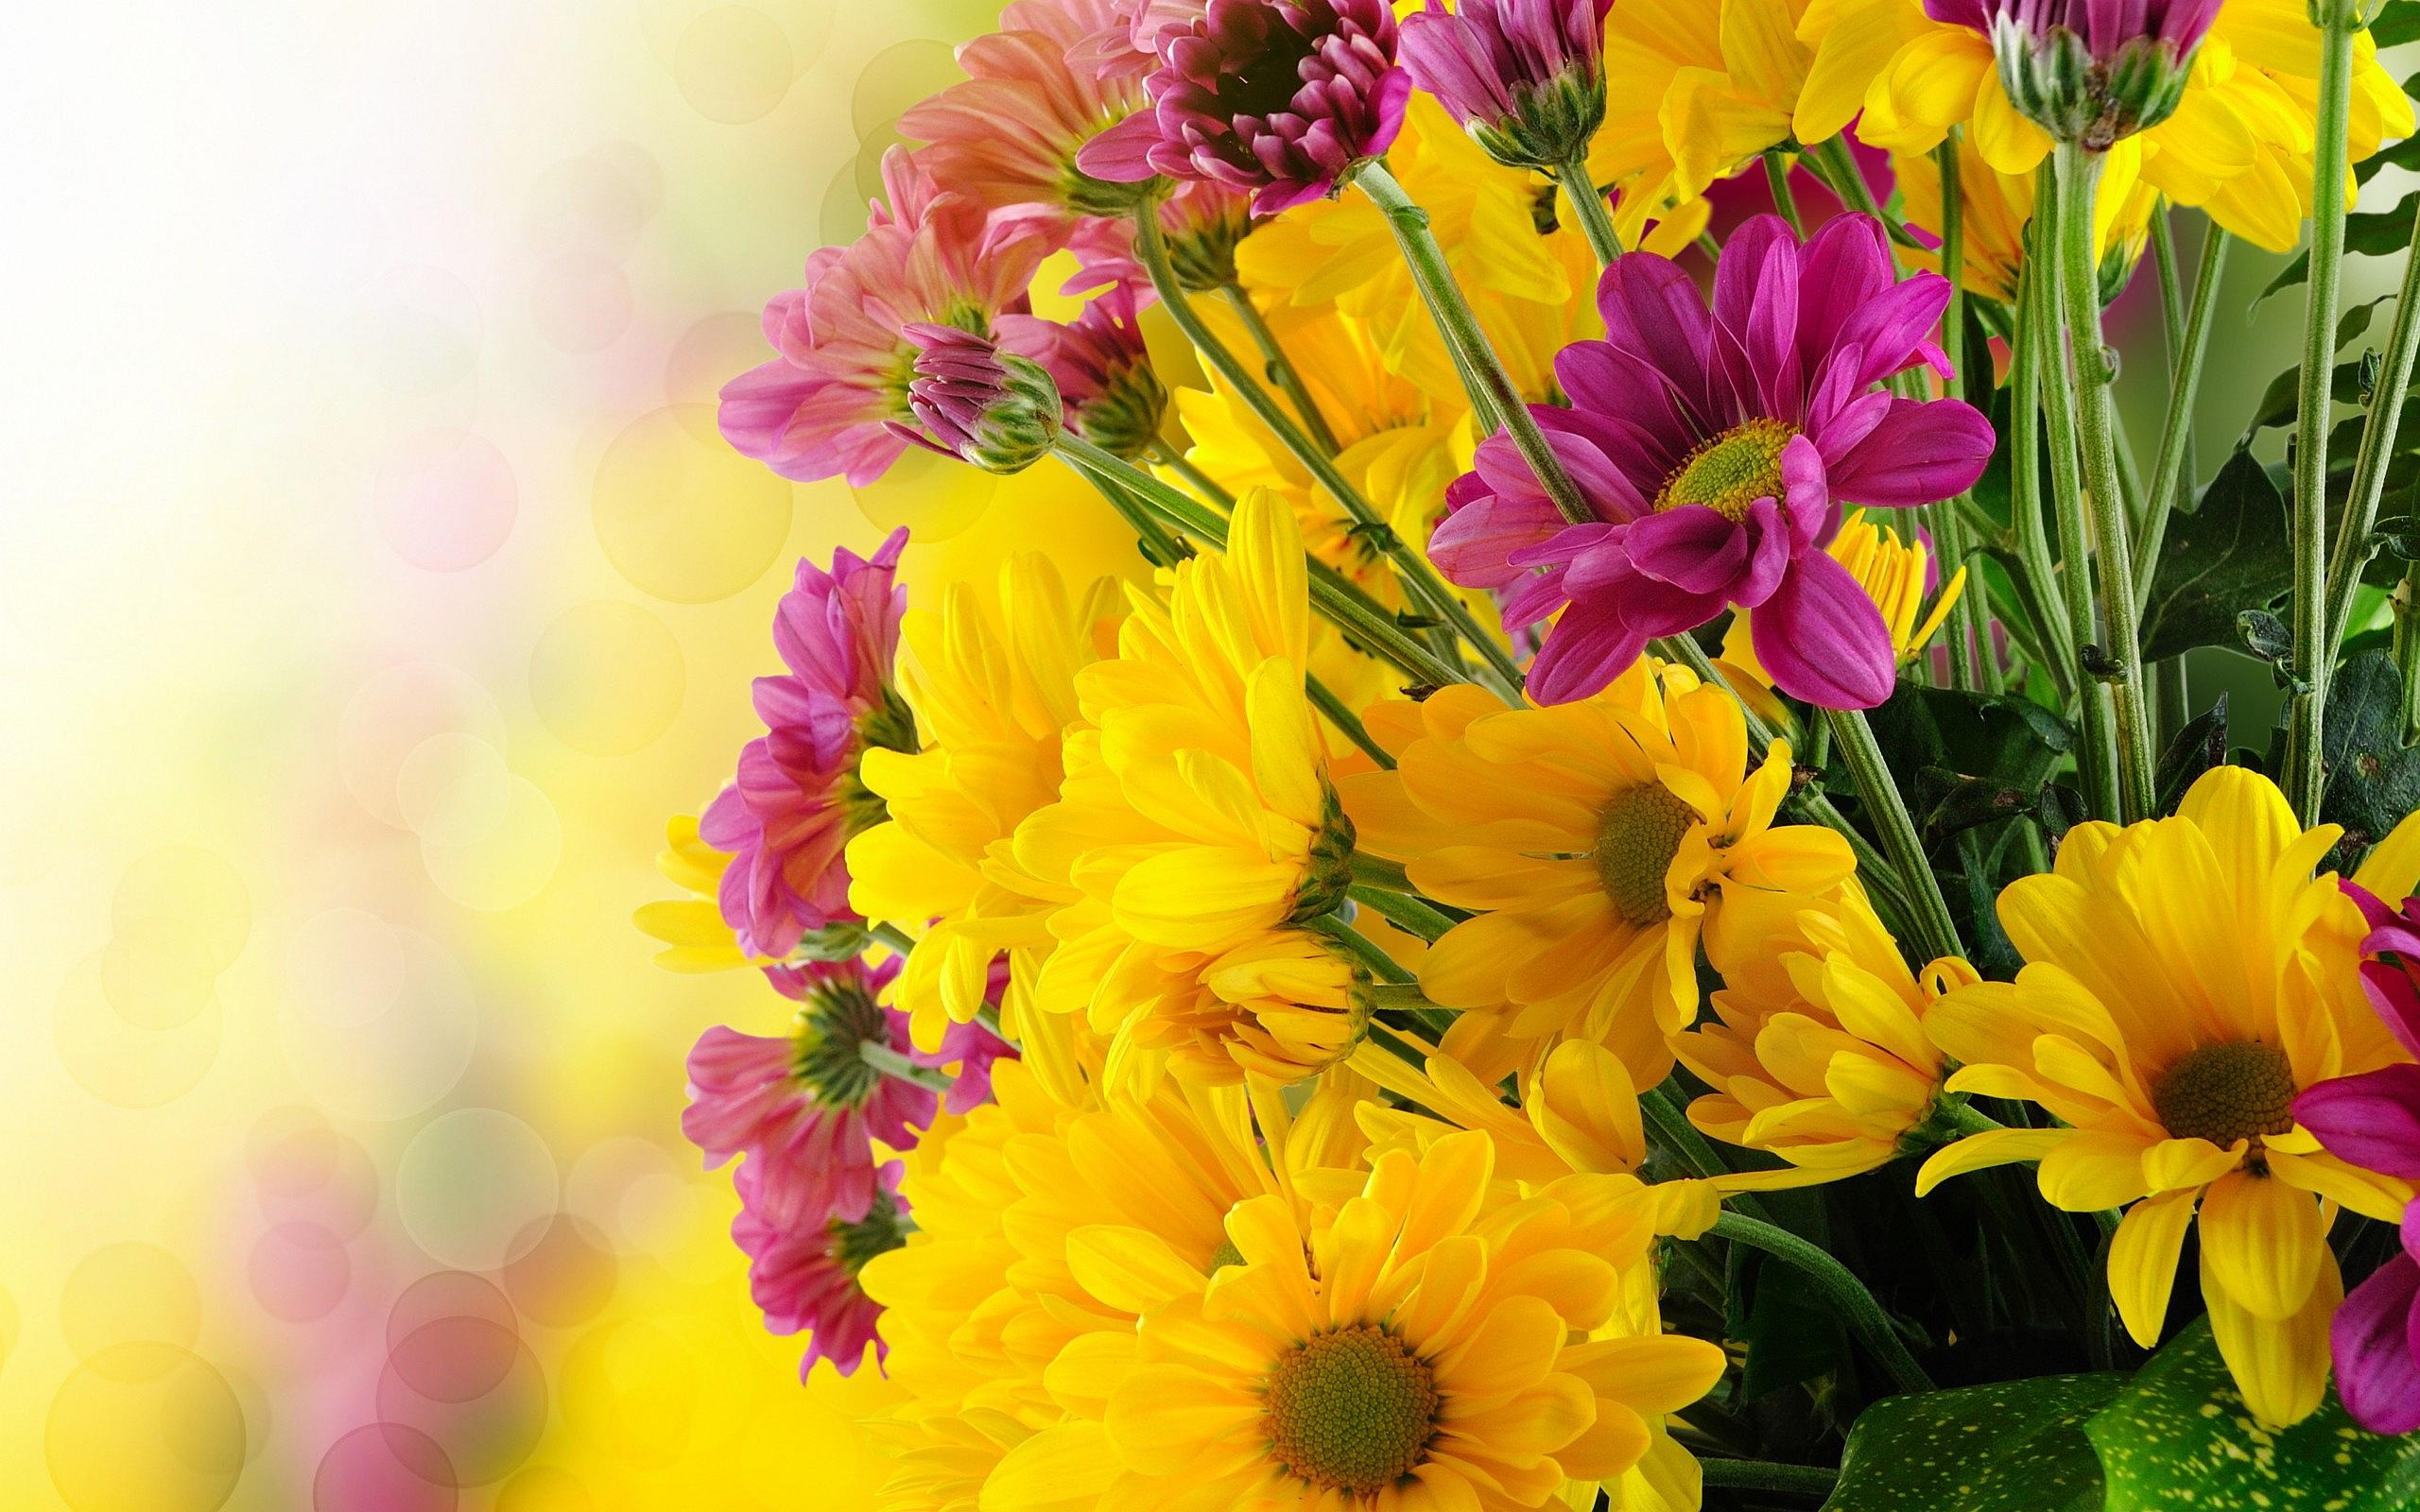 Bright Flowers Images - Free Download on Freepik